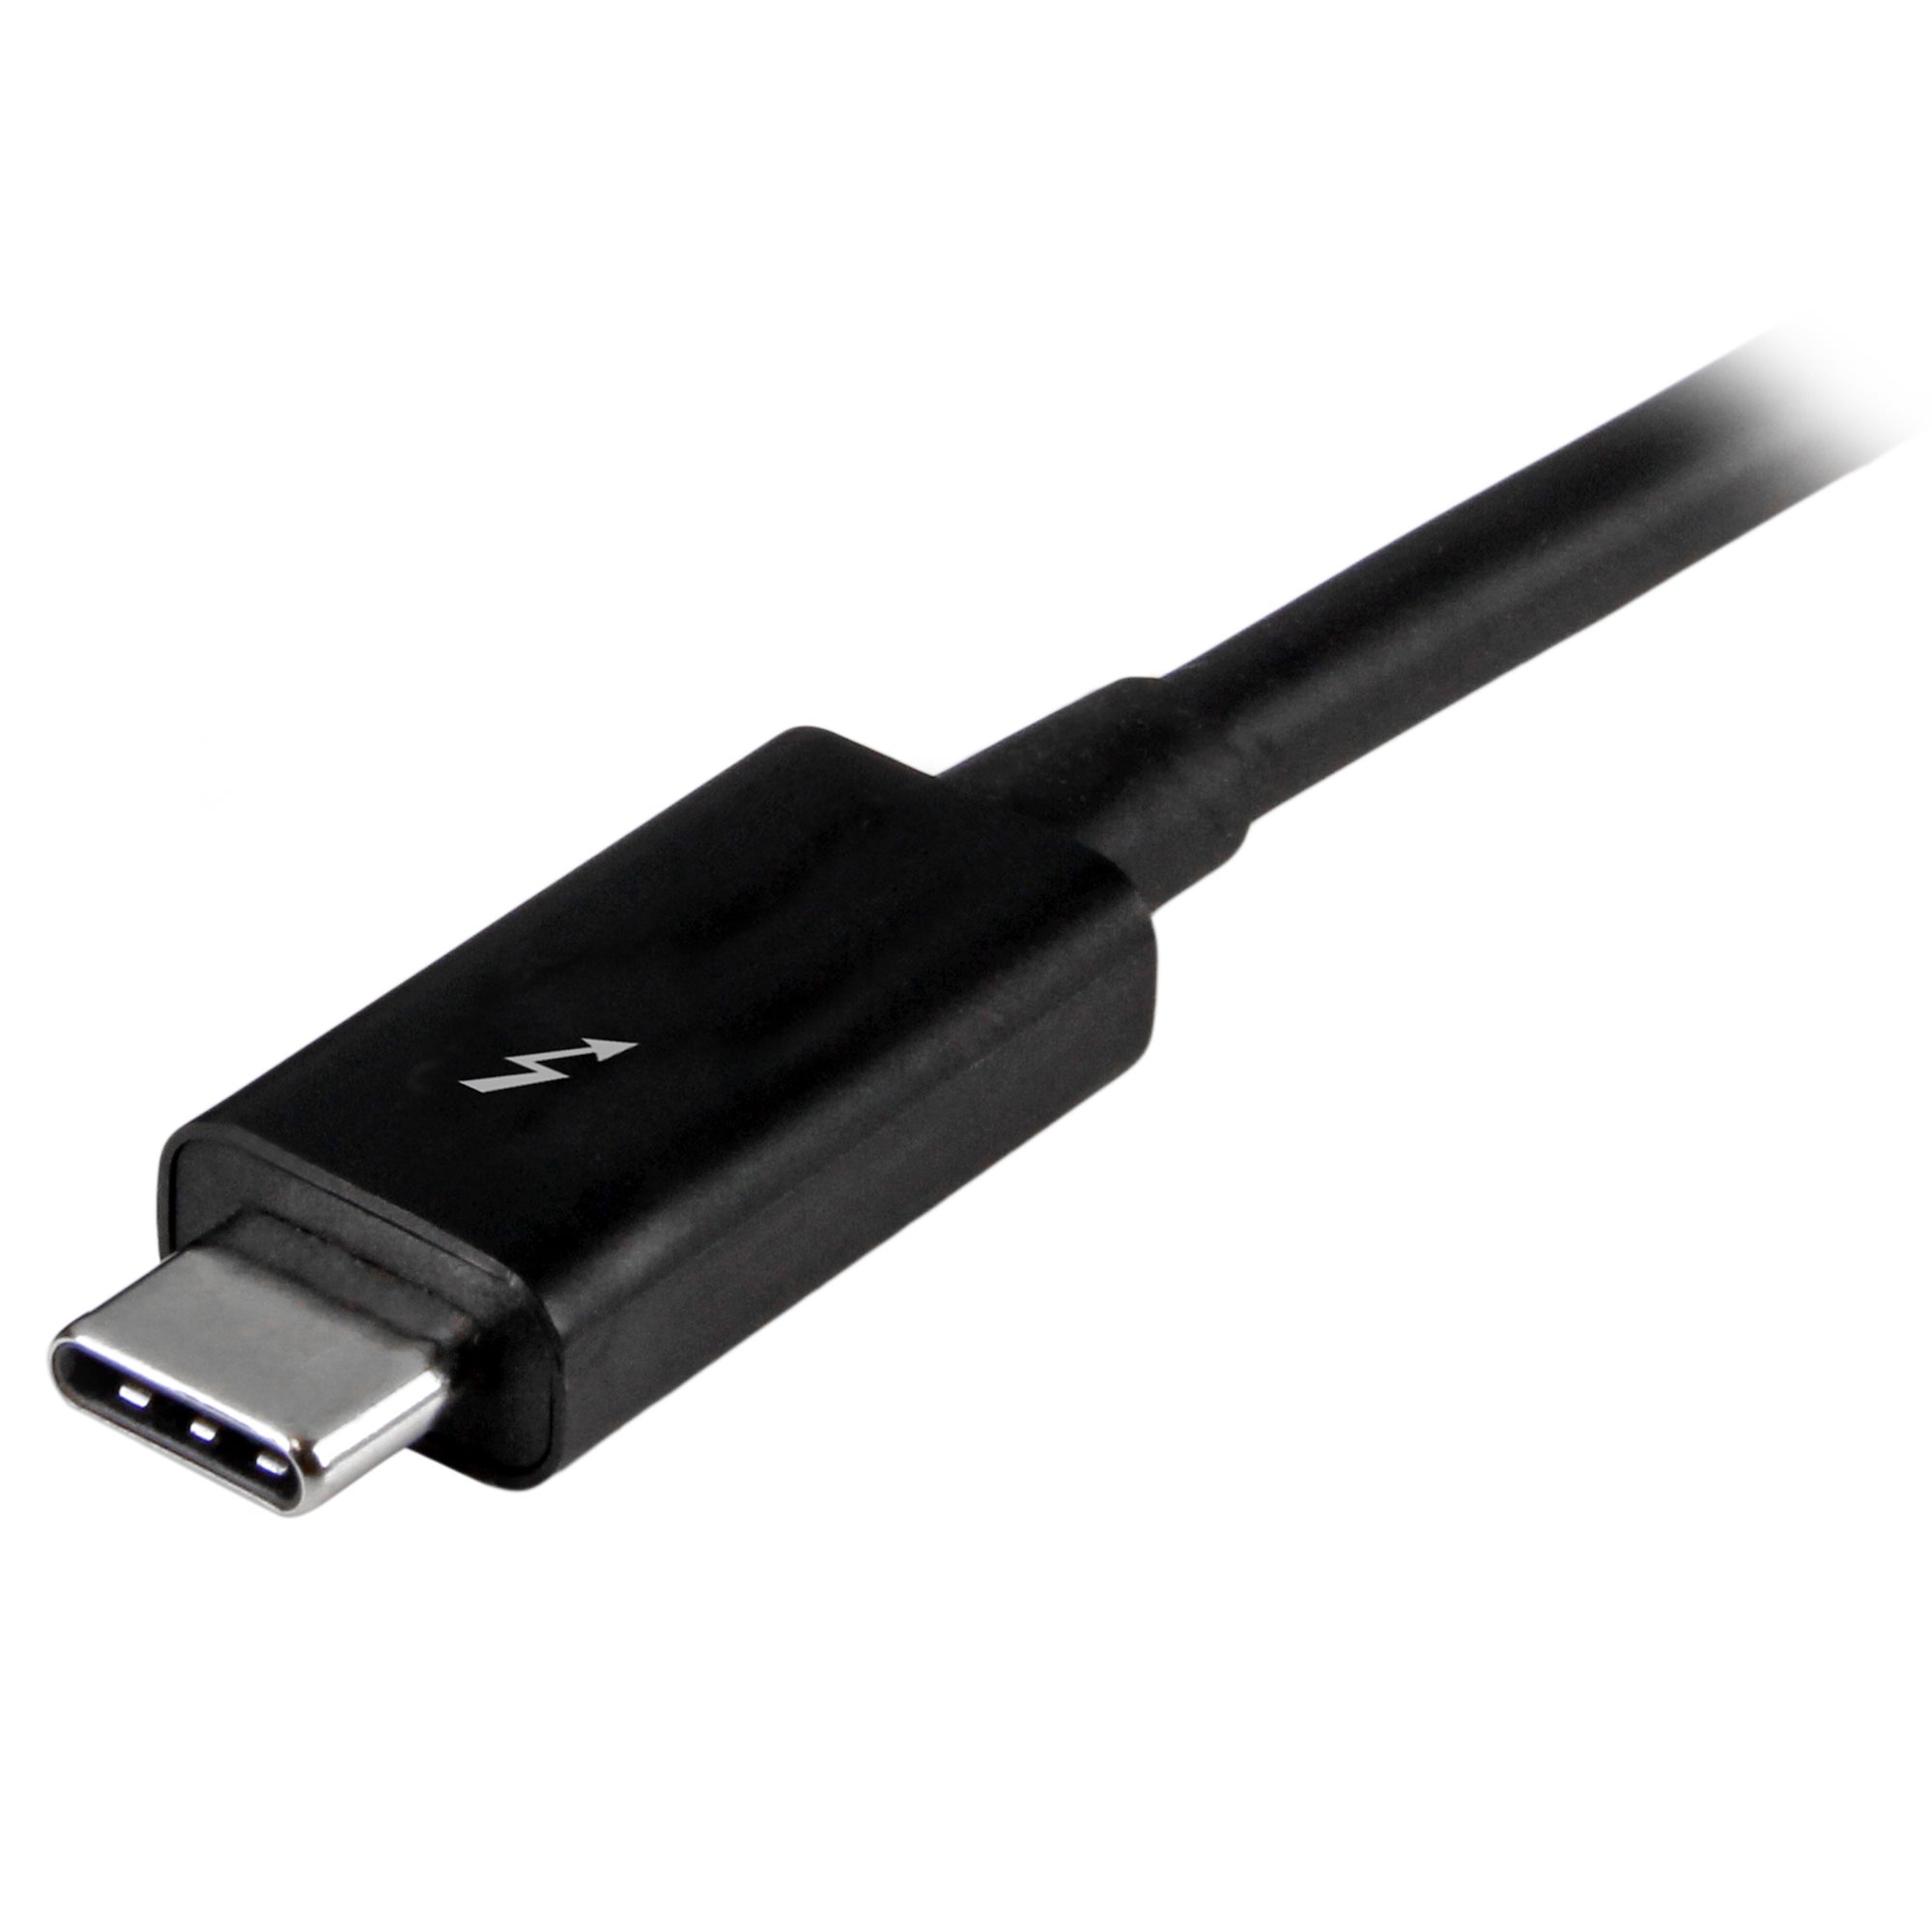 Cable 1m Thunderbolt 3 USB-C 20Gbps - Cables y adaptadores